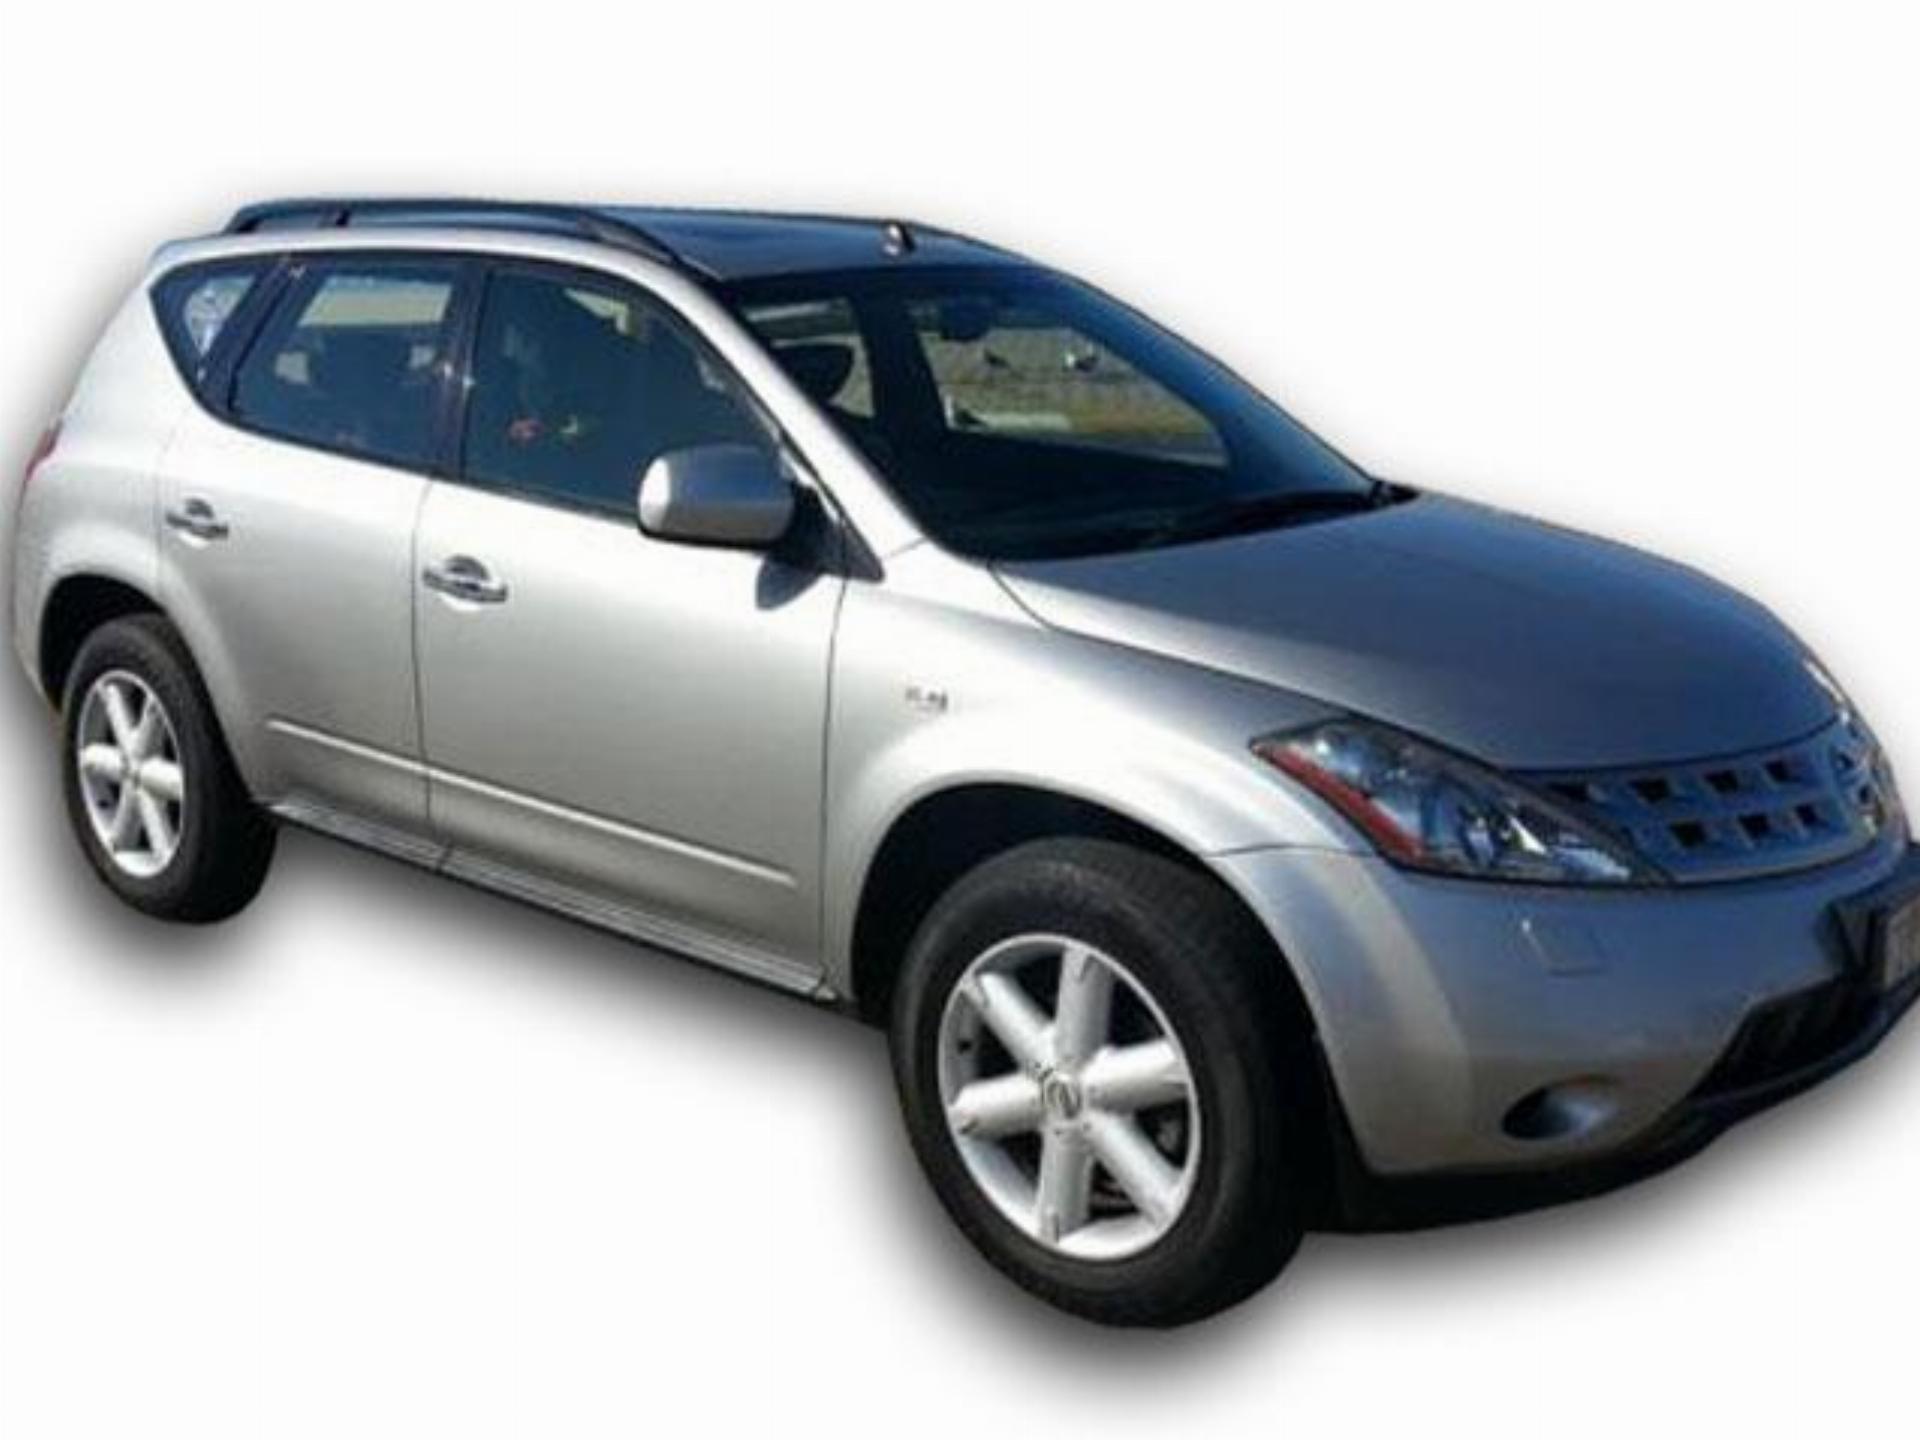 Used Nissan Murano 3.5L V6 (174KW) 2008 on auction - PV1002791